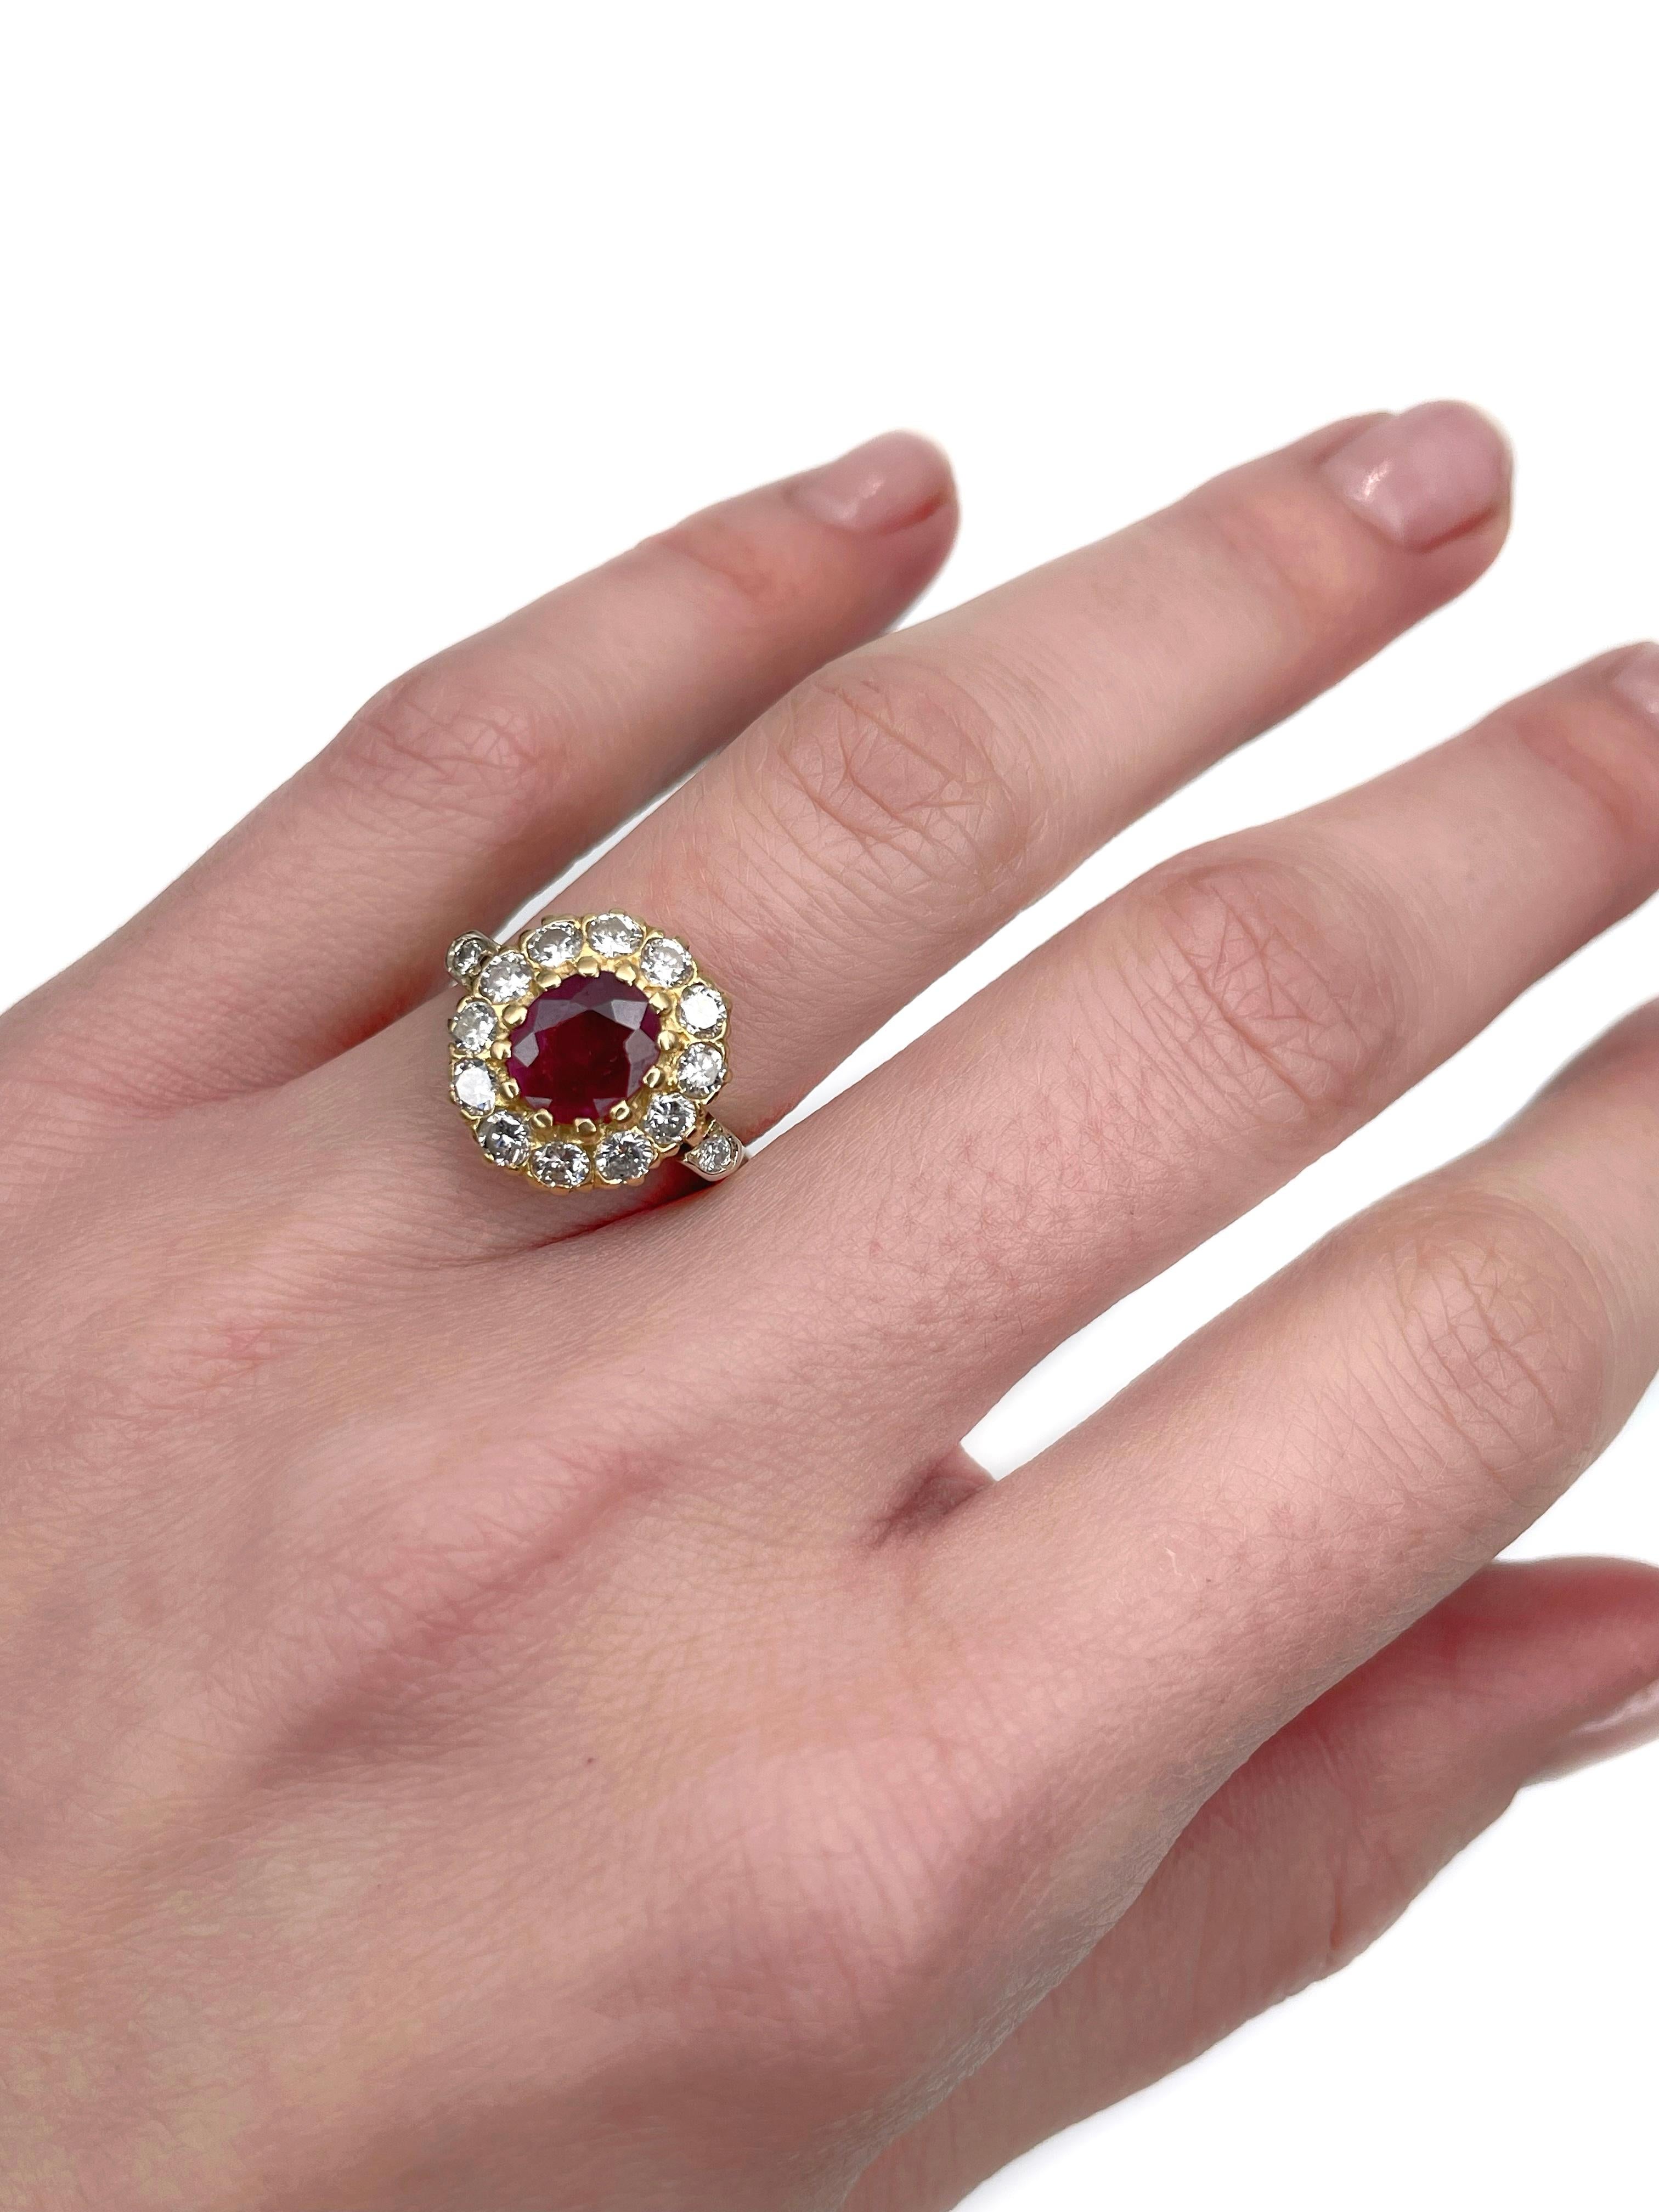 This is a Mid Century cluster ring crafted in 18K yellow gold. Circa 1960. 

It features:
- 1 ruby, oval cut, 1.00ct, slpR 7/4, P2
- 18 diamonds, brilliant cut, TW 0.80ct, RW-STW, SI-P1

Weight: 6.32g
Size: 16.5 (US 6)

IMPORTANT: please ask about